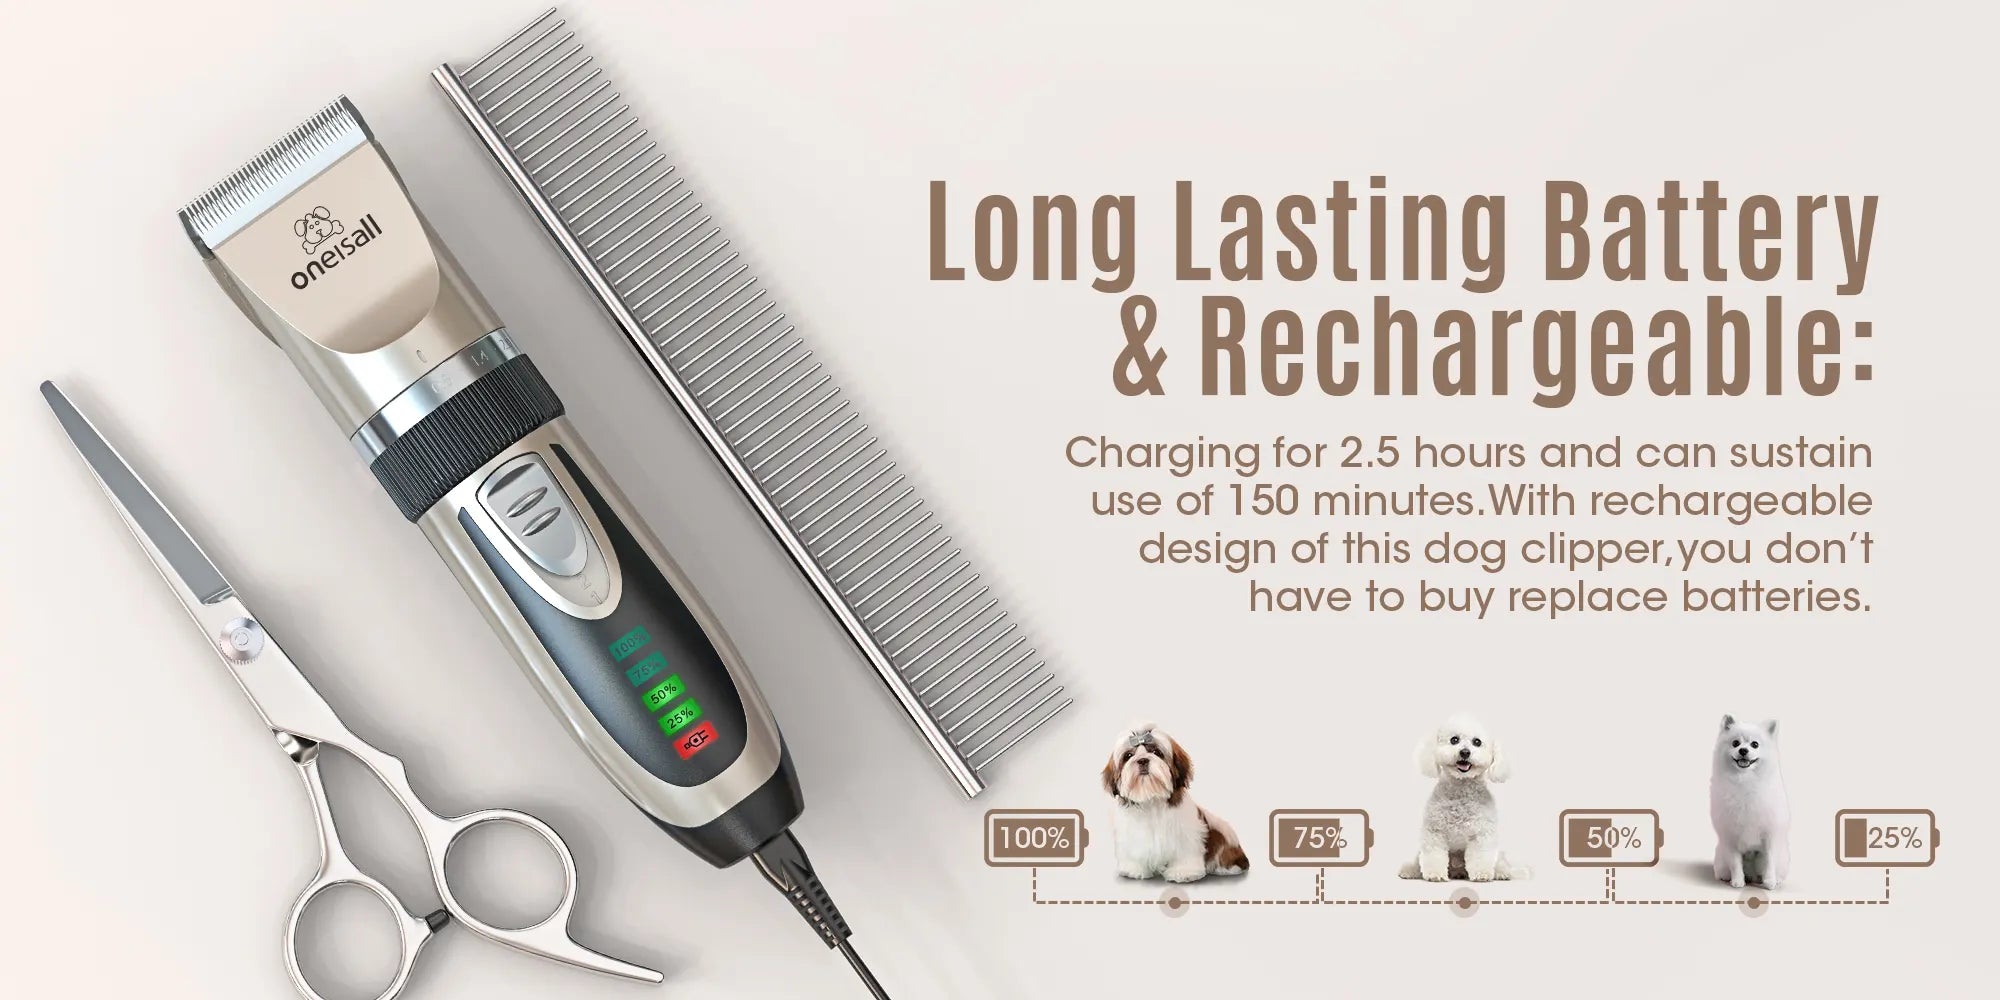 long lasting battery & rechargeable